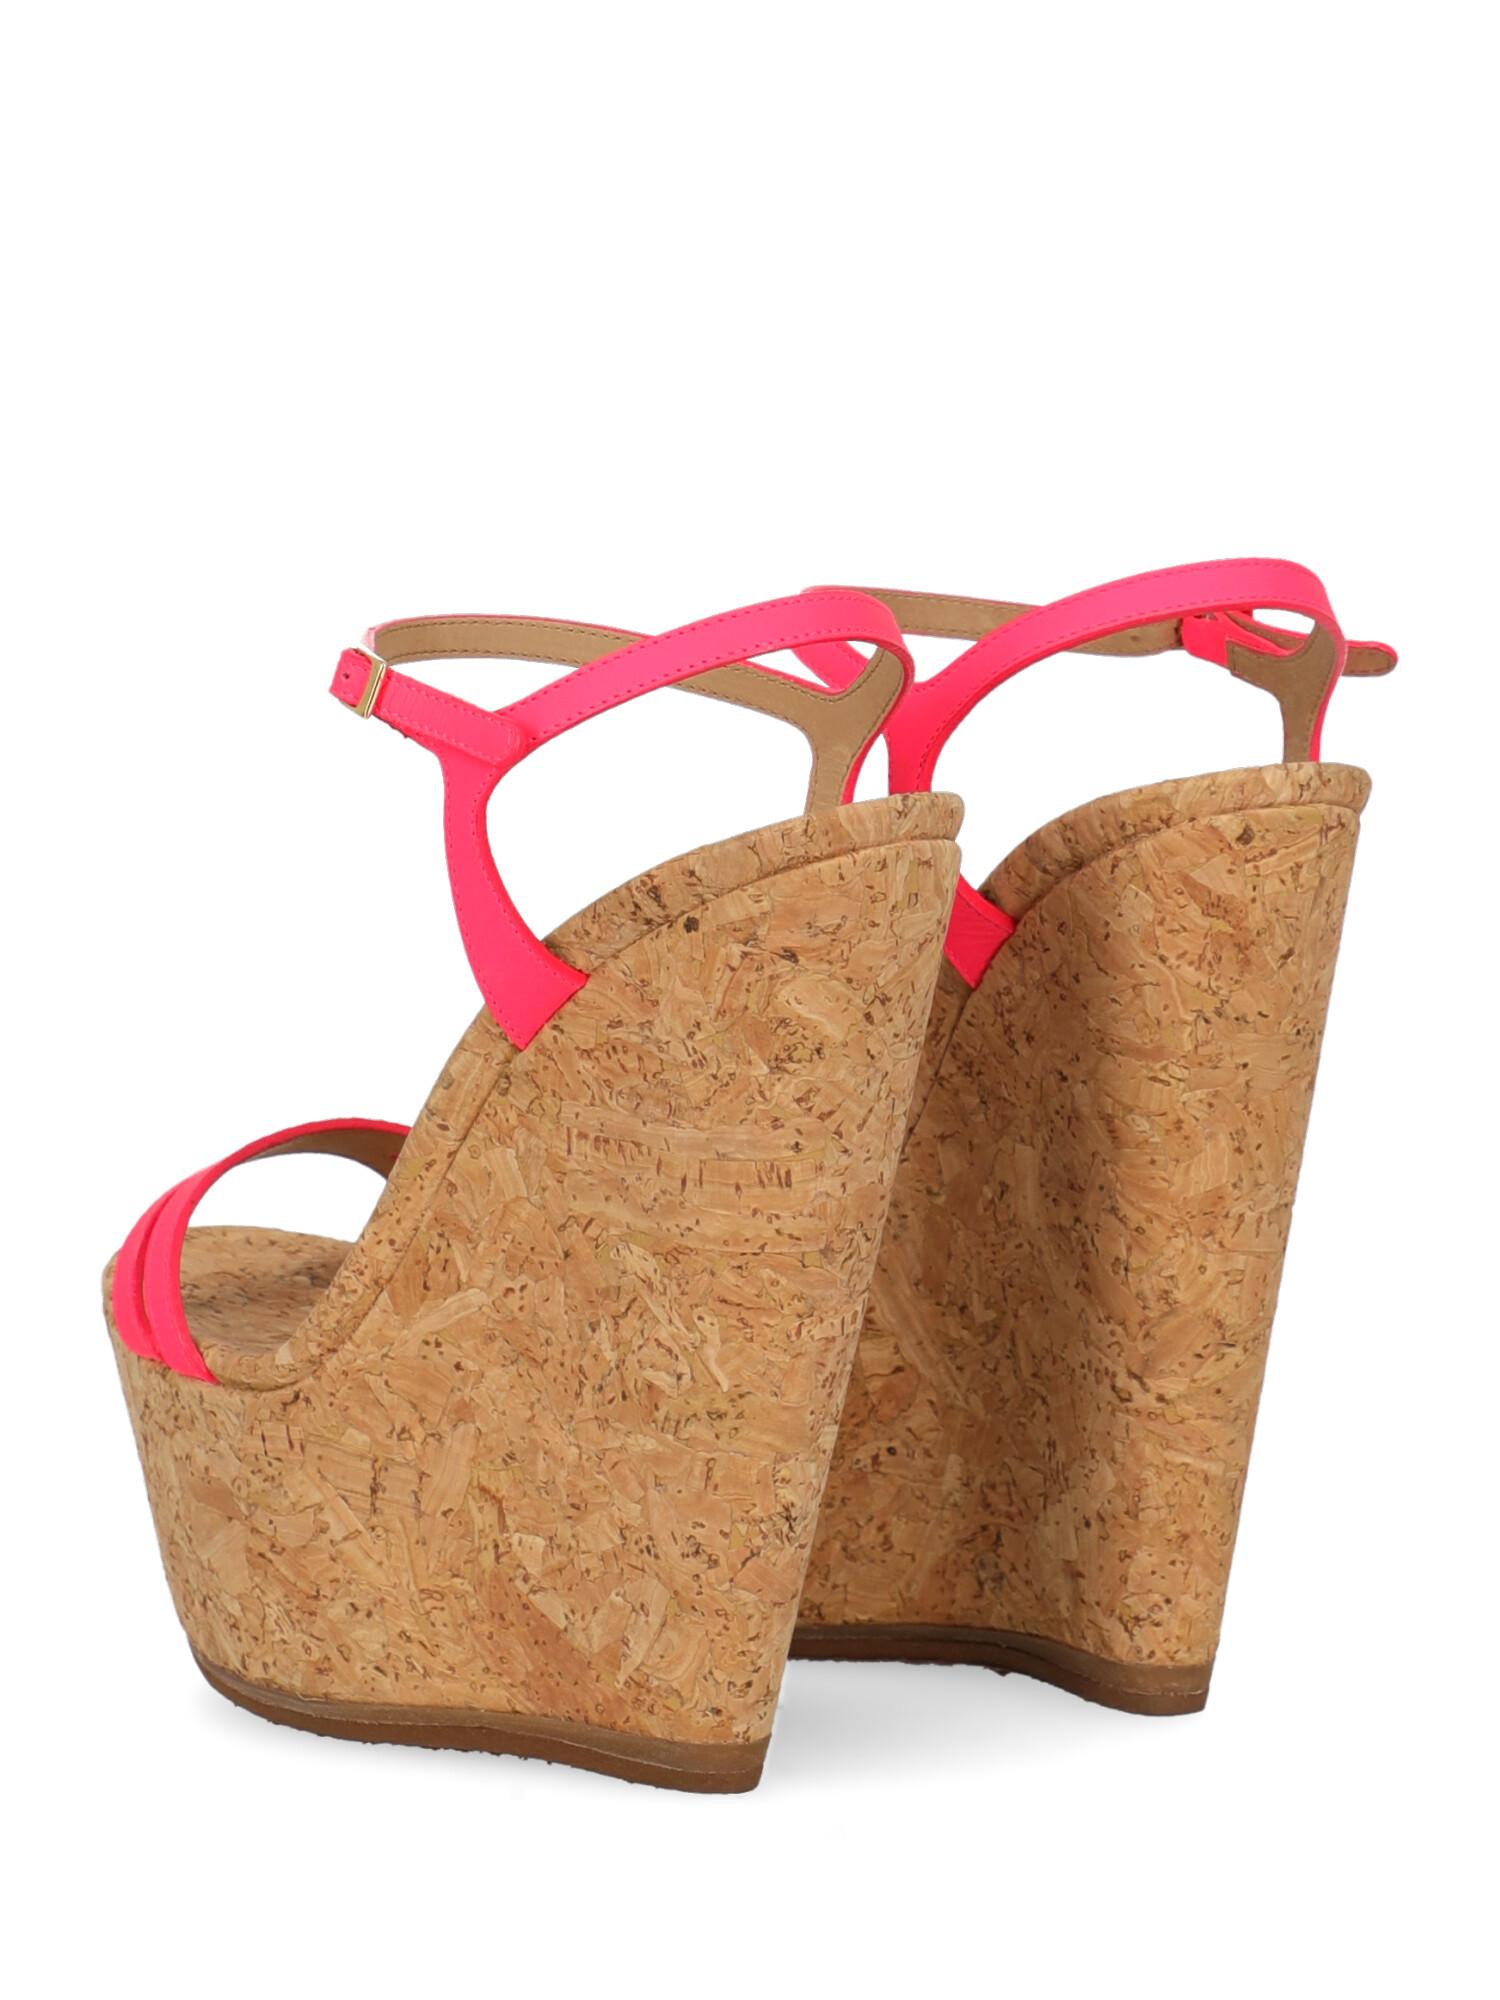 dsquared2 wedges